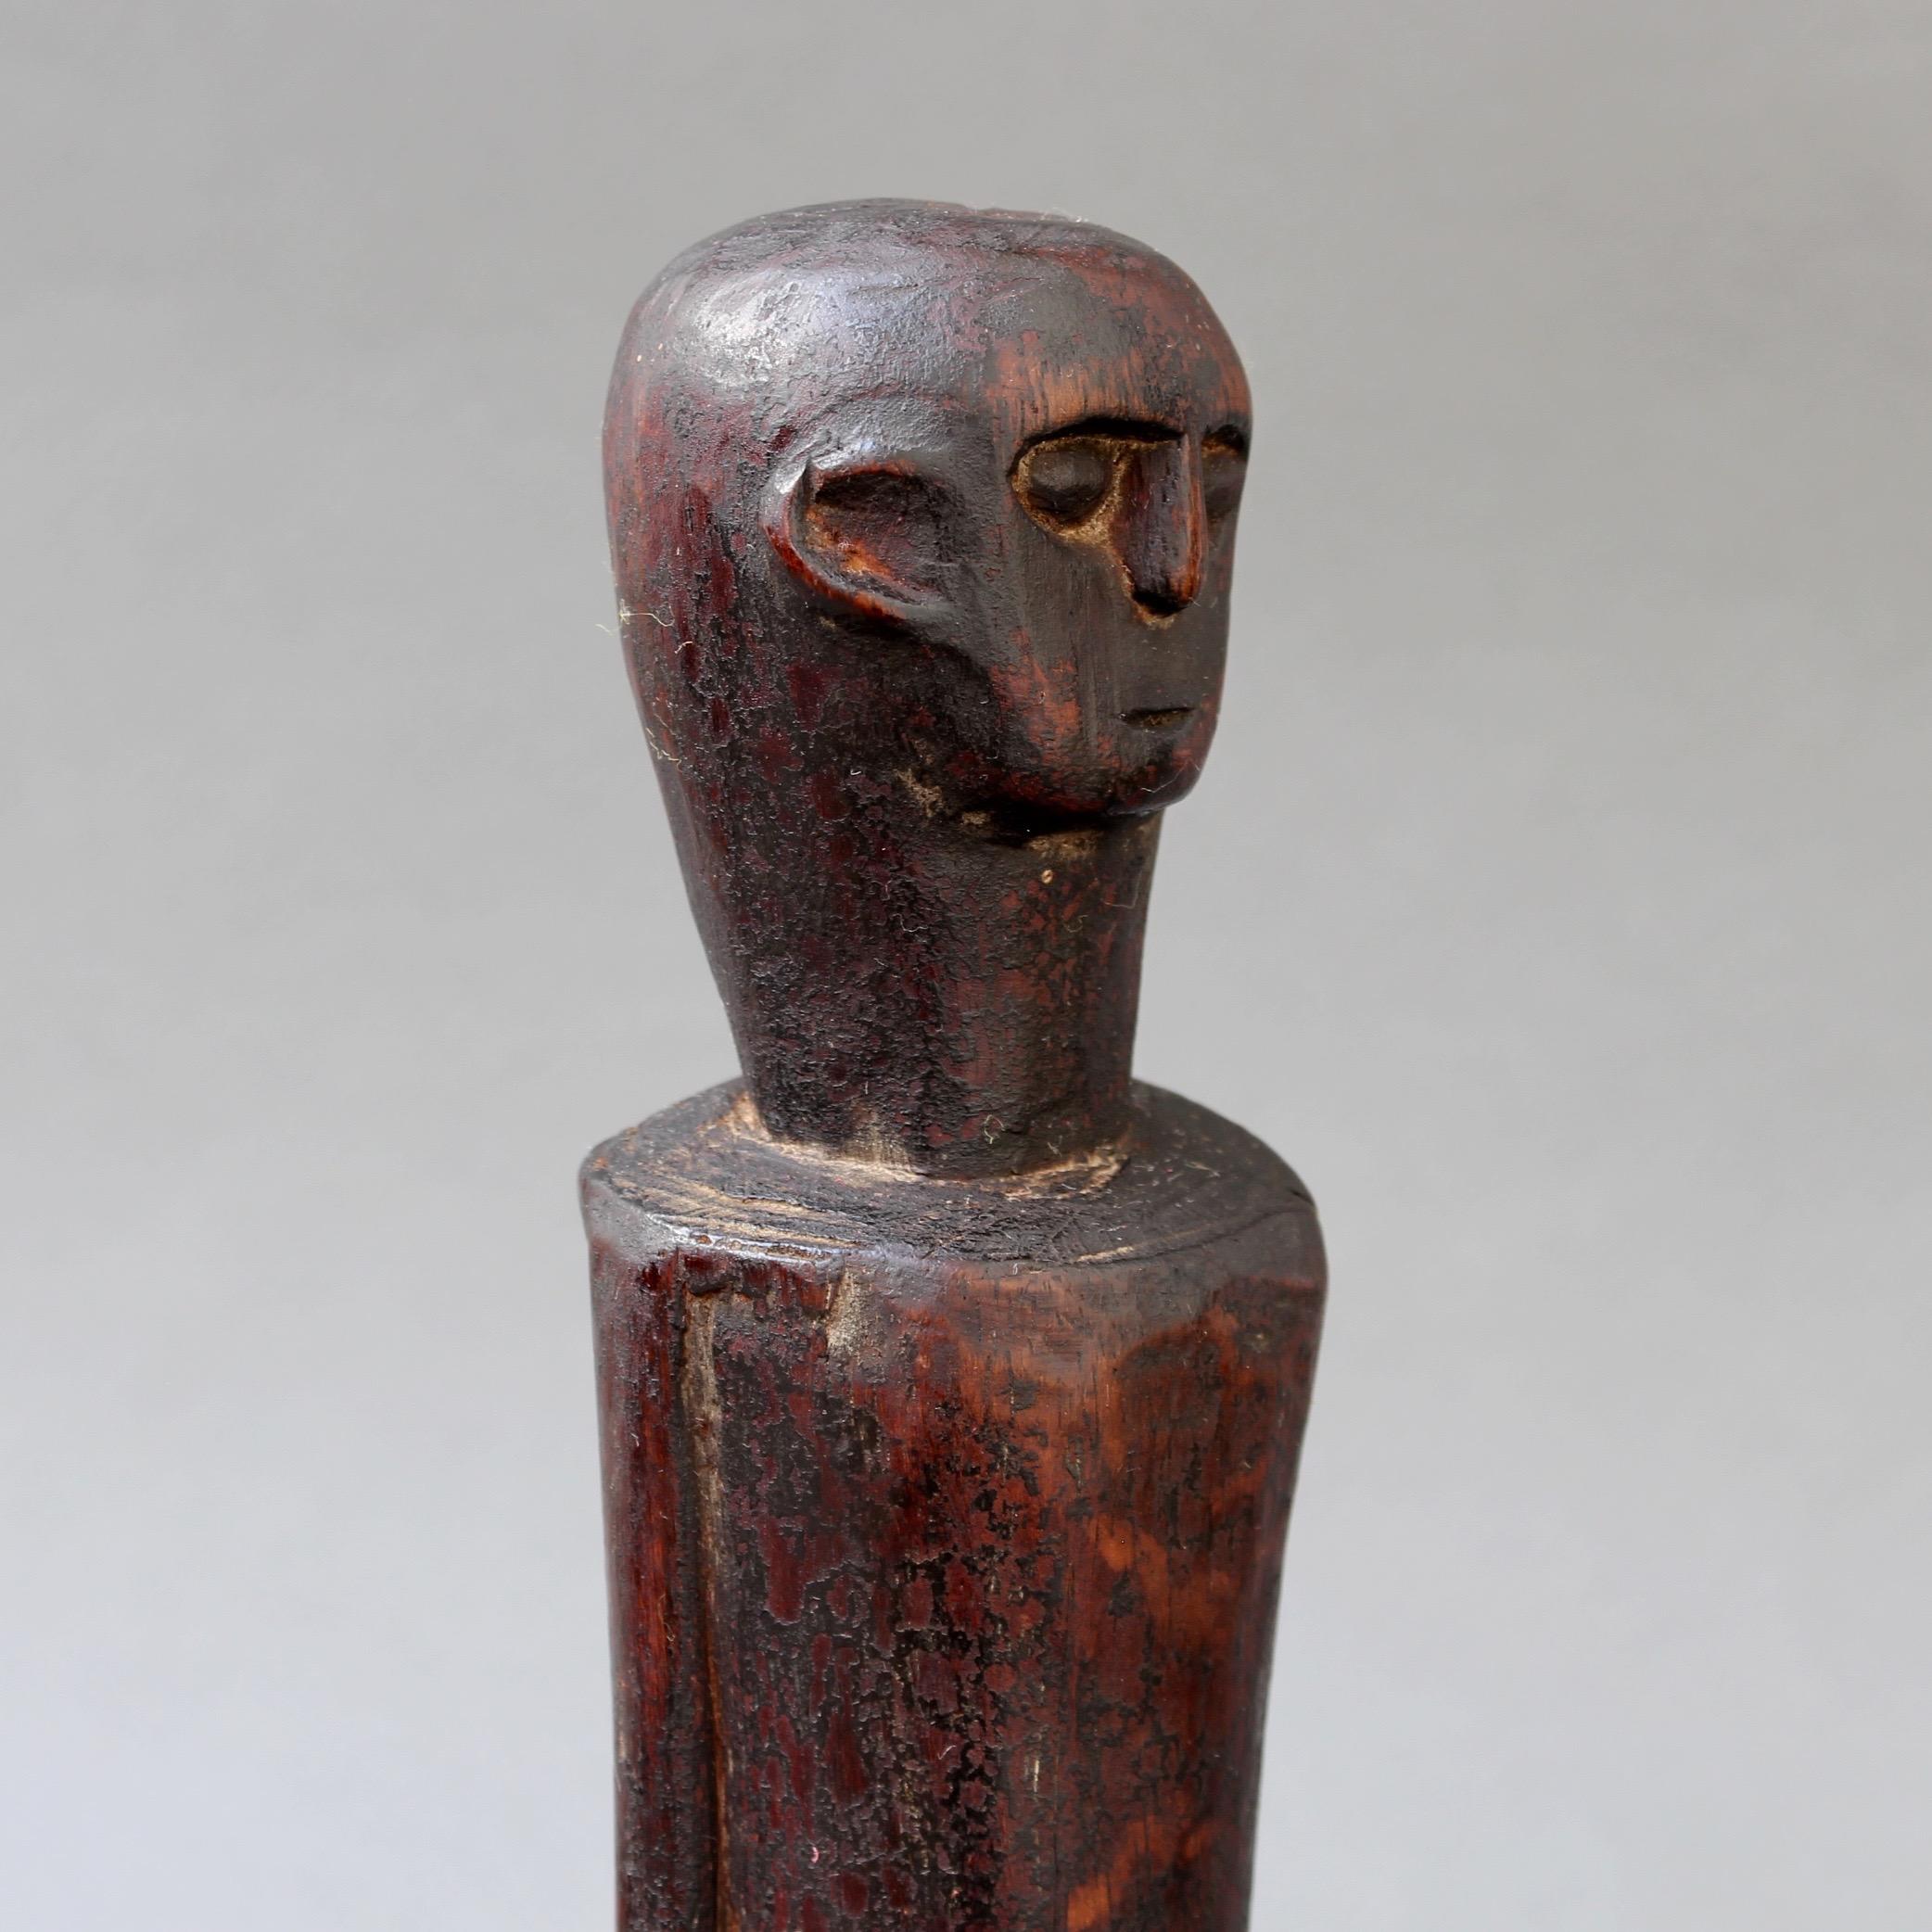 Wooden Sculpture or Carving of Fertility Figure from Sumba Island, Indonesia 3